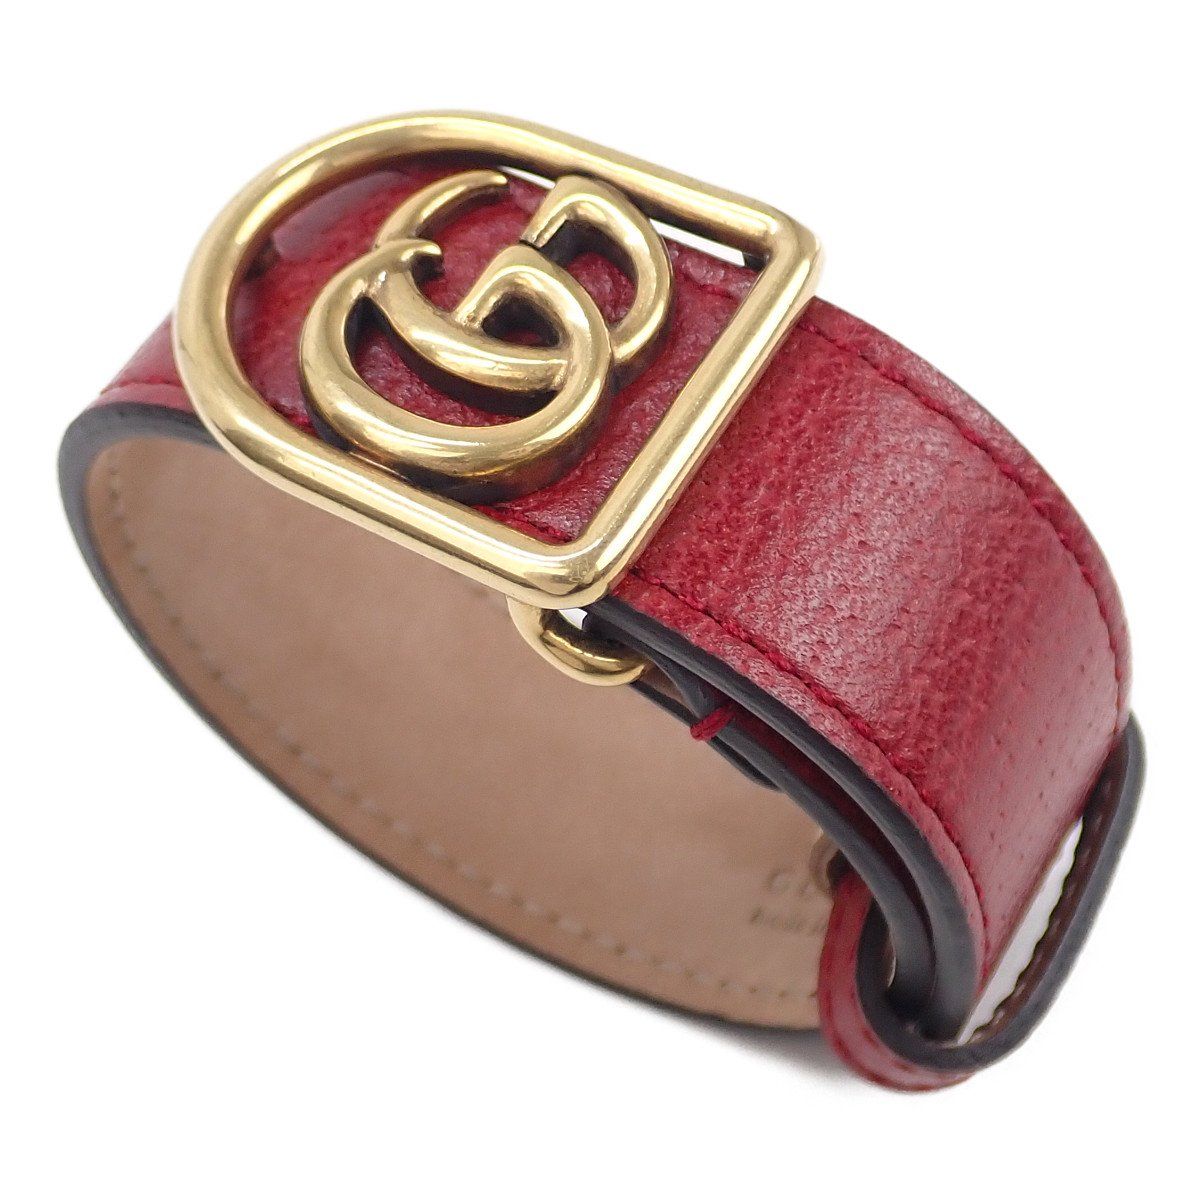 Gucci GG Marmont Bracelet Leather Bracelet in Good condition